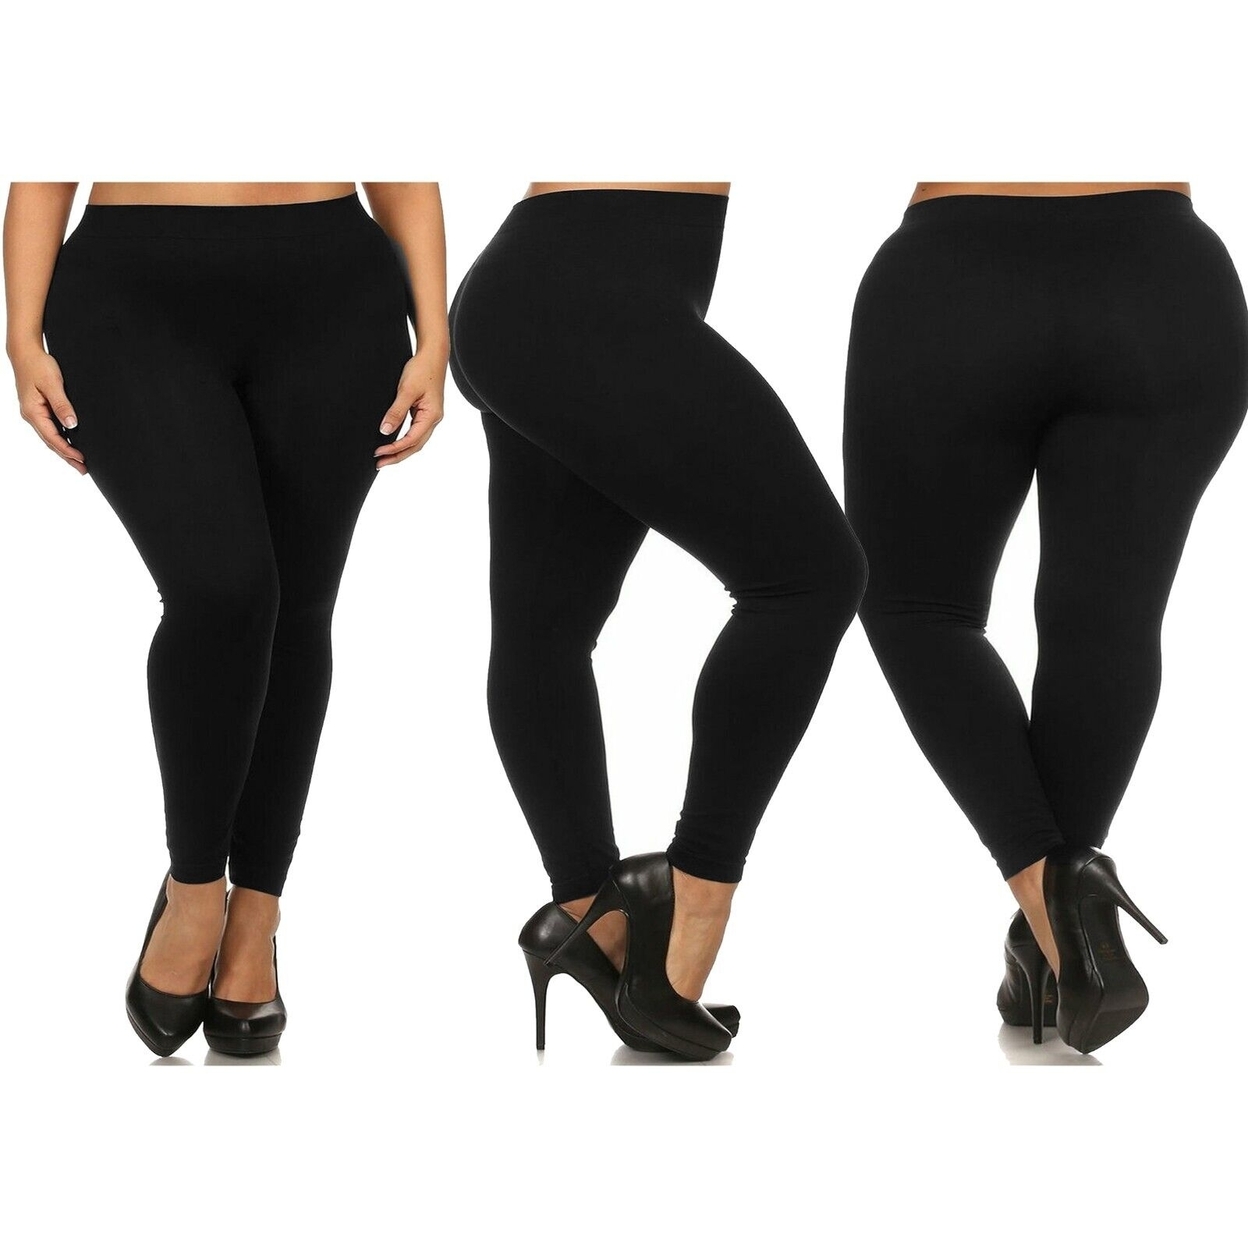 2-Pack: Women's Casual Ultra-Soft Smooth High Waisted Athletic Active Yoga Leggings Plus Size Available - Black & Black, 4x